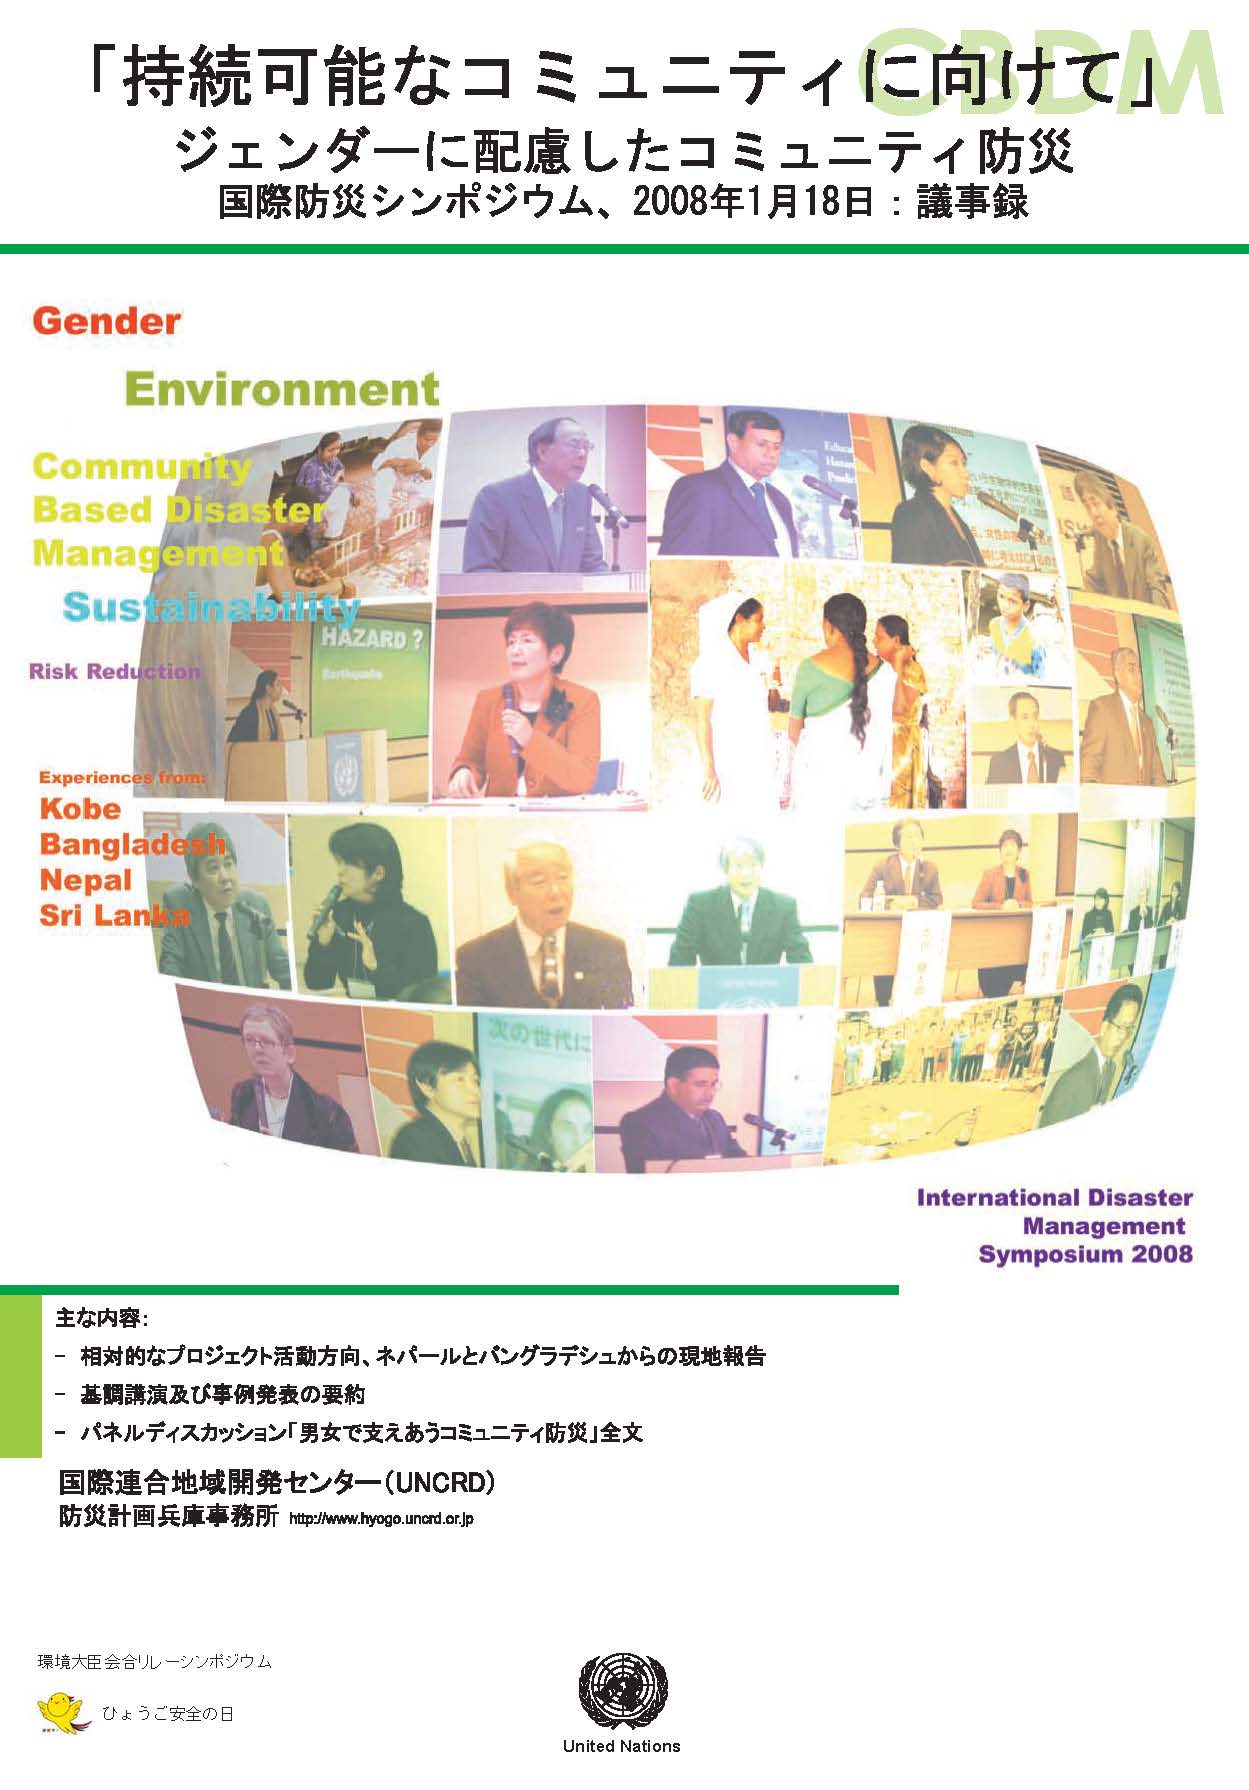 Cover of the International Disaster Management Symposium 2008 in Japanese